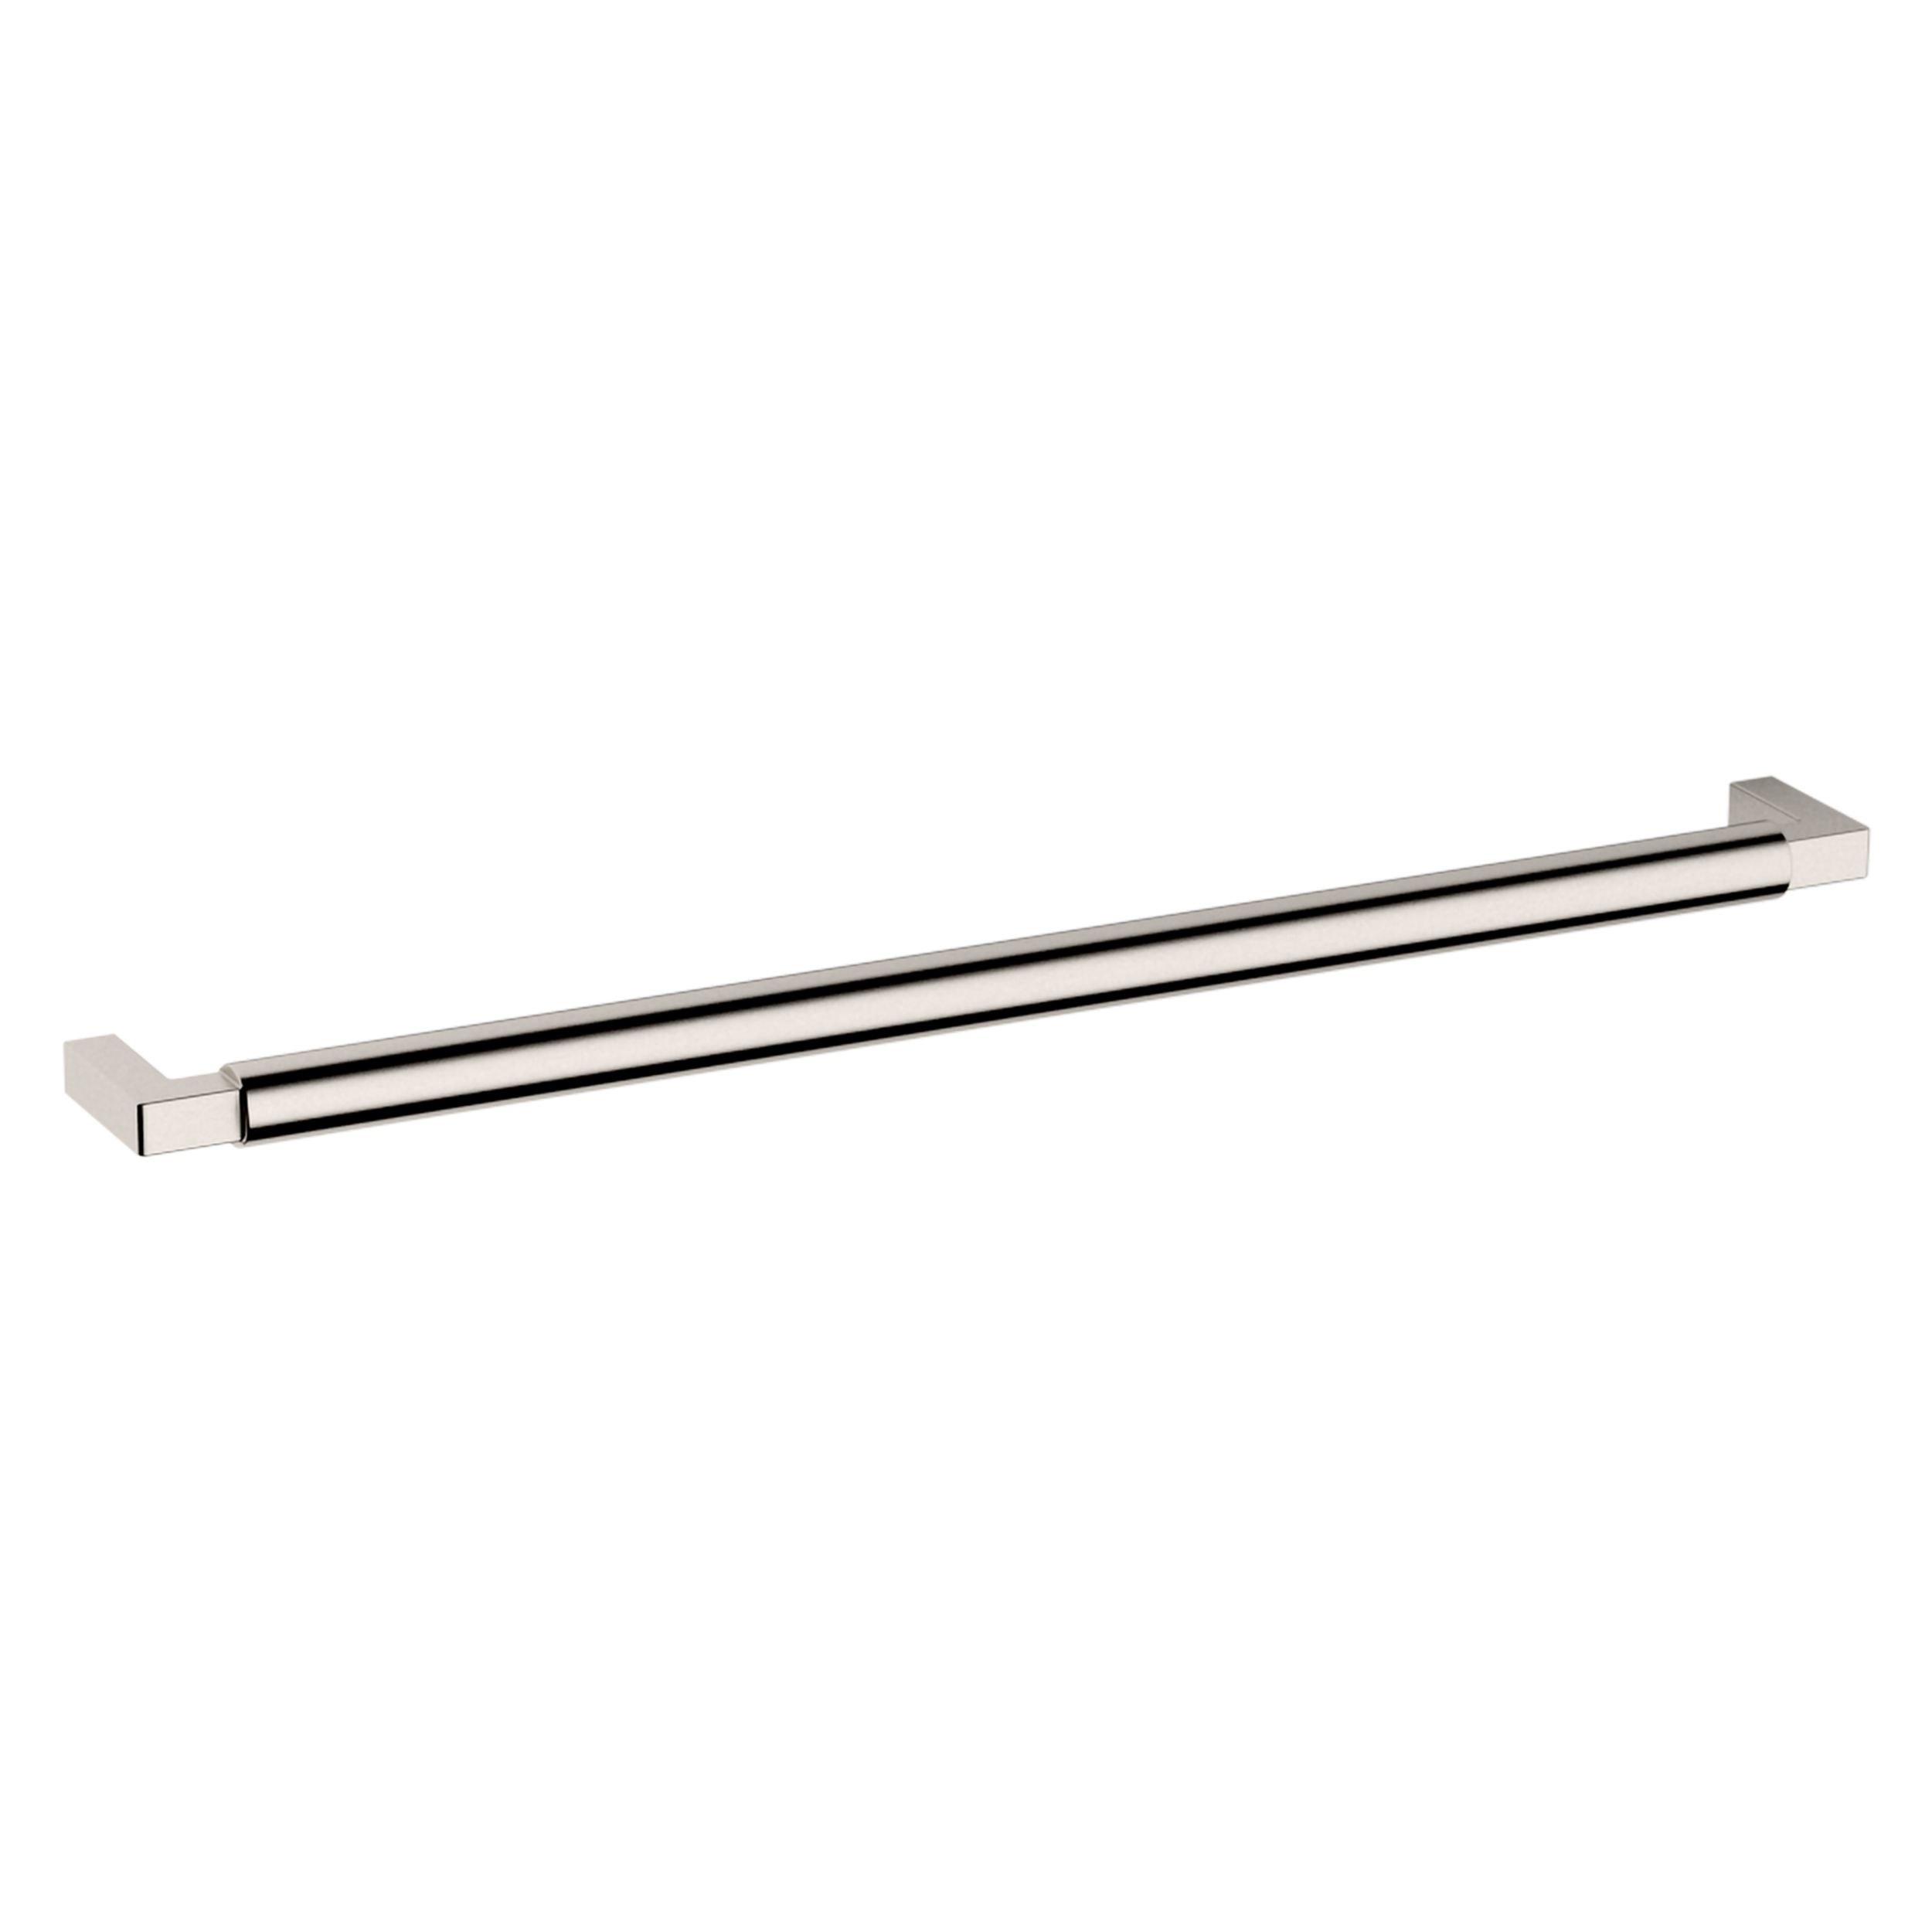 4433 Gramercy Pull - Lifetime (PVD) Polished Nickel